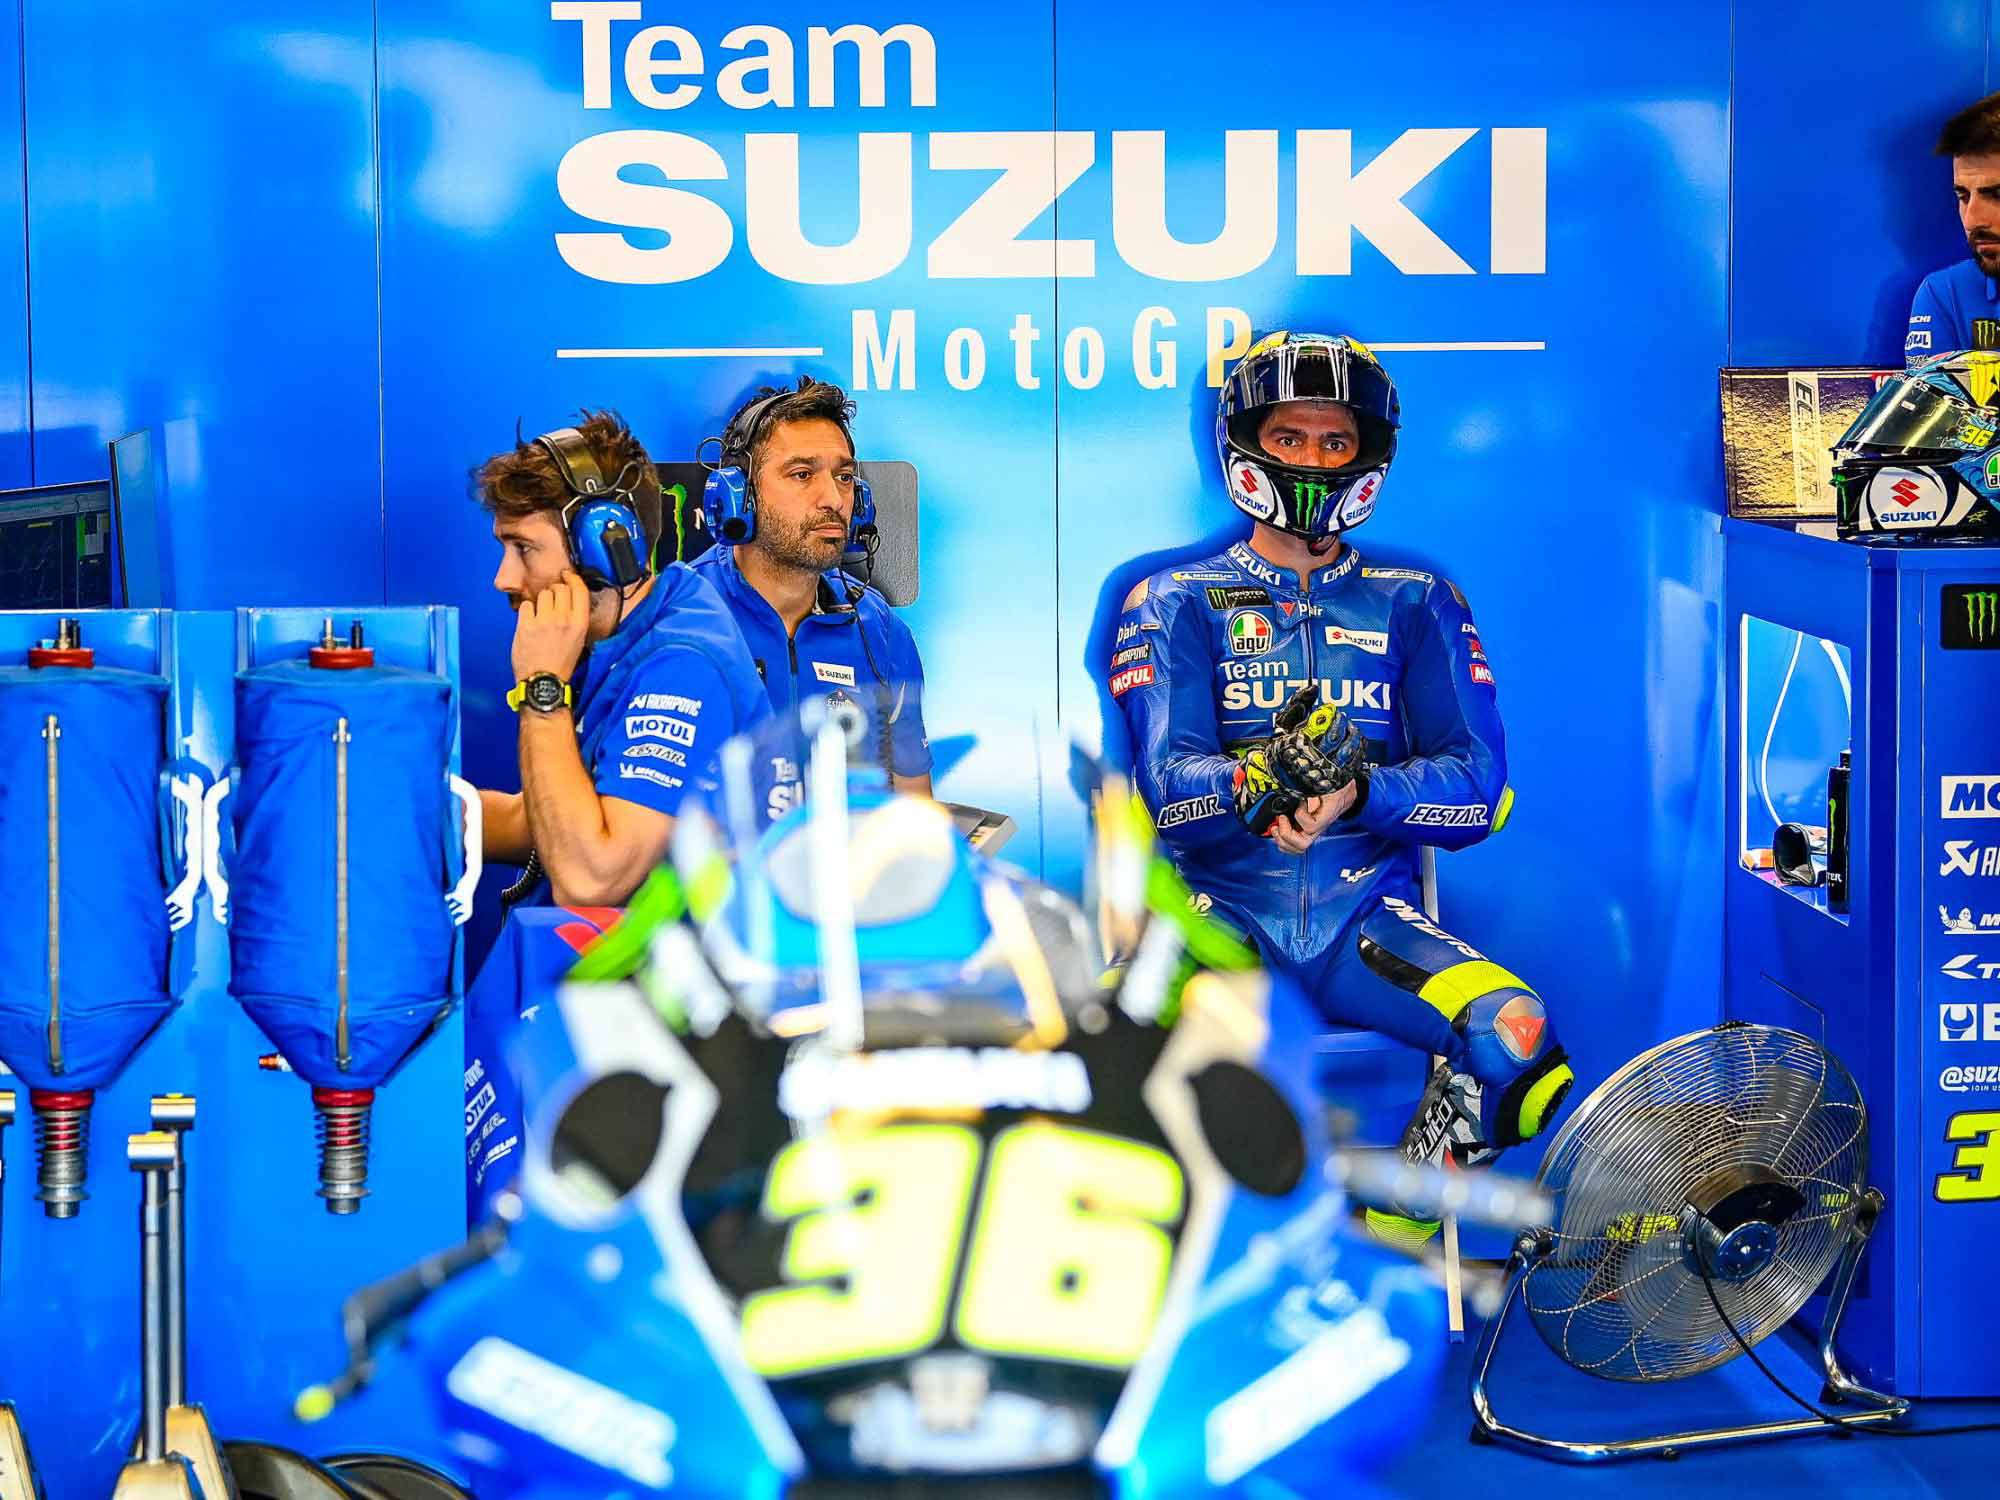 Despite exiting MotoGP, Suzuki states it remains committed to its motorcycle and ATV business as well as MotoAmerica, AMA Supercross, AMA Motocross, and NHRA Pro Stock Drag Racing.